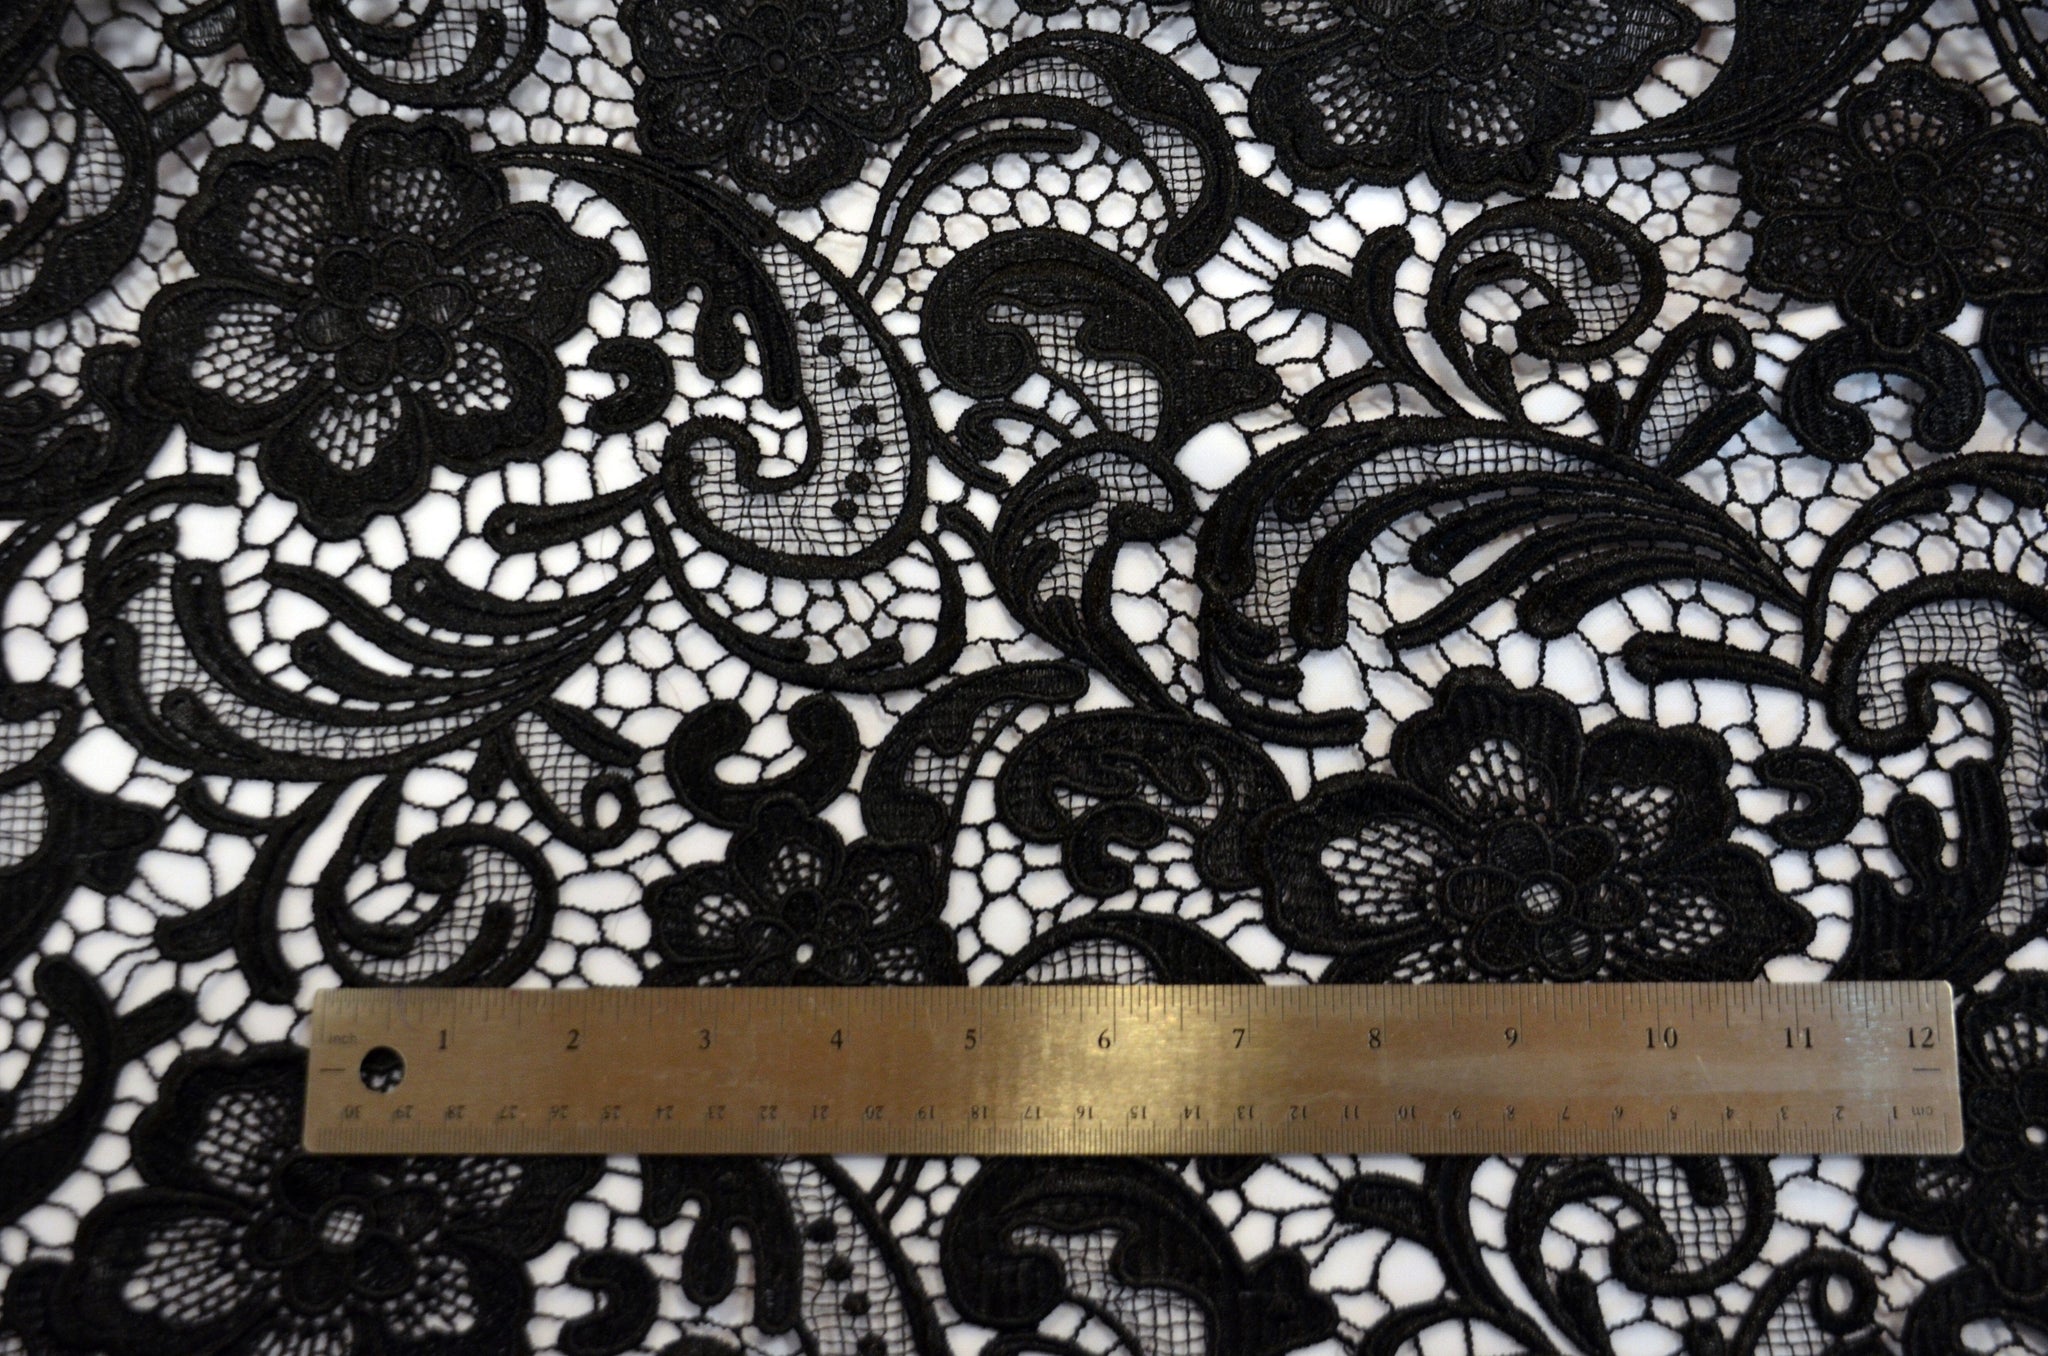 Black Polyester Lace Fabric by The Yard (100% Polyester)